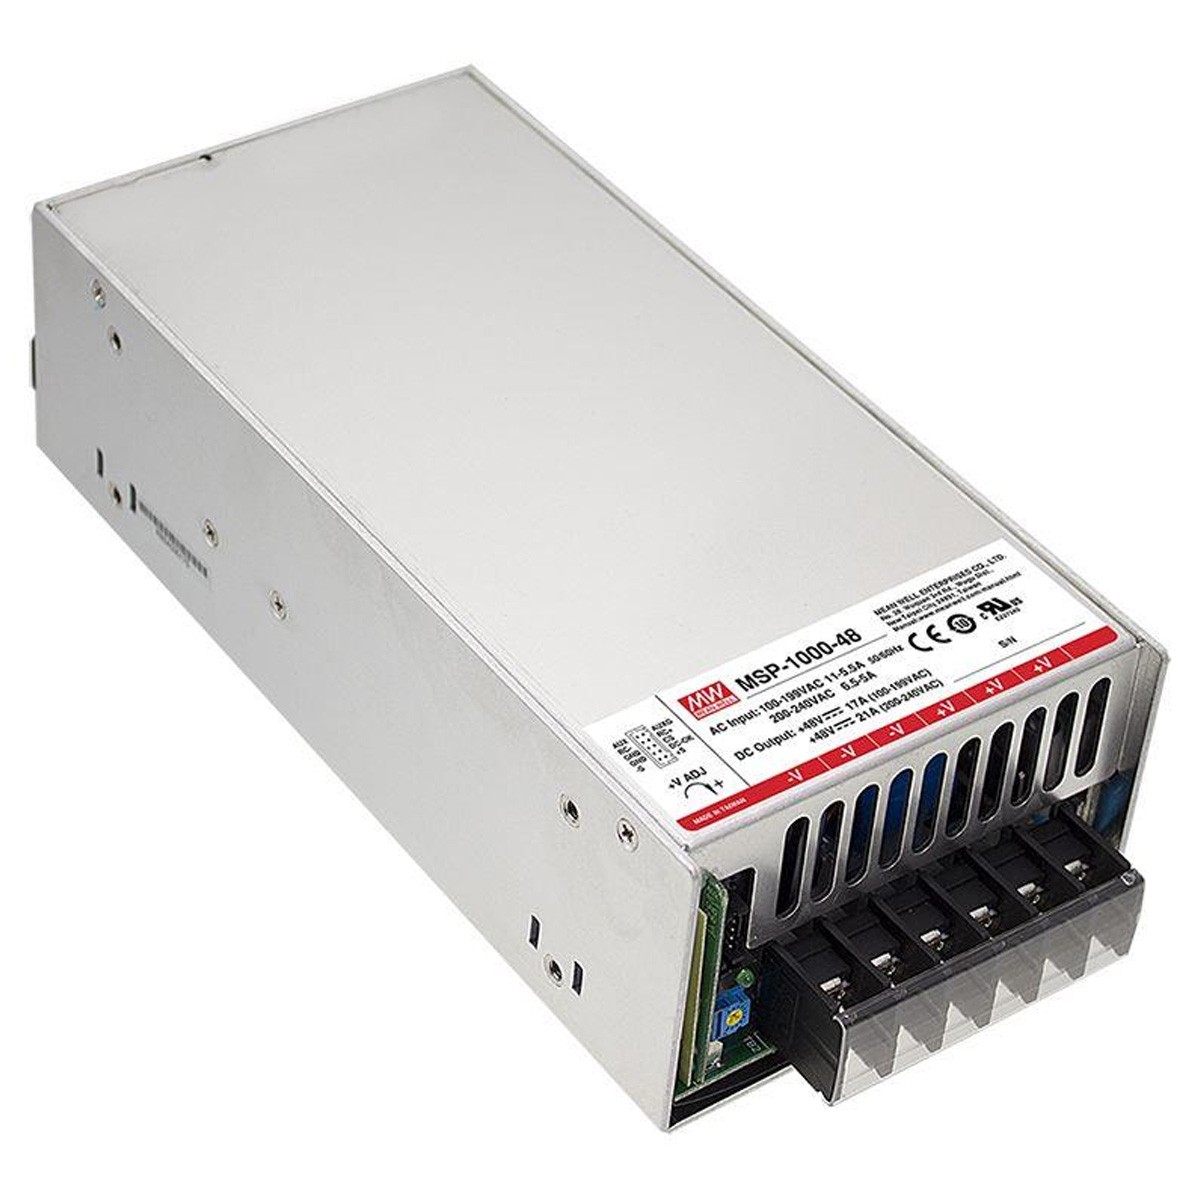 MEAN WELL MSP-1000-12 Switching Mode Power Supply SMPS 1000W 12V 80A